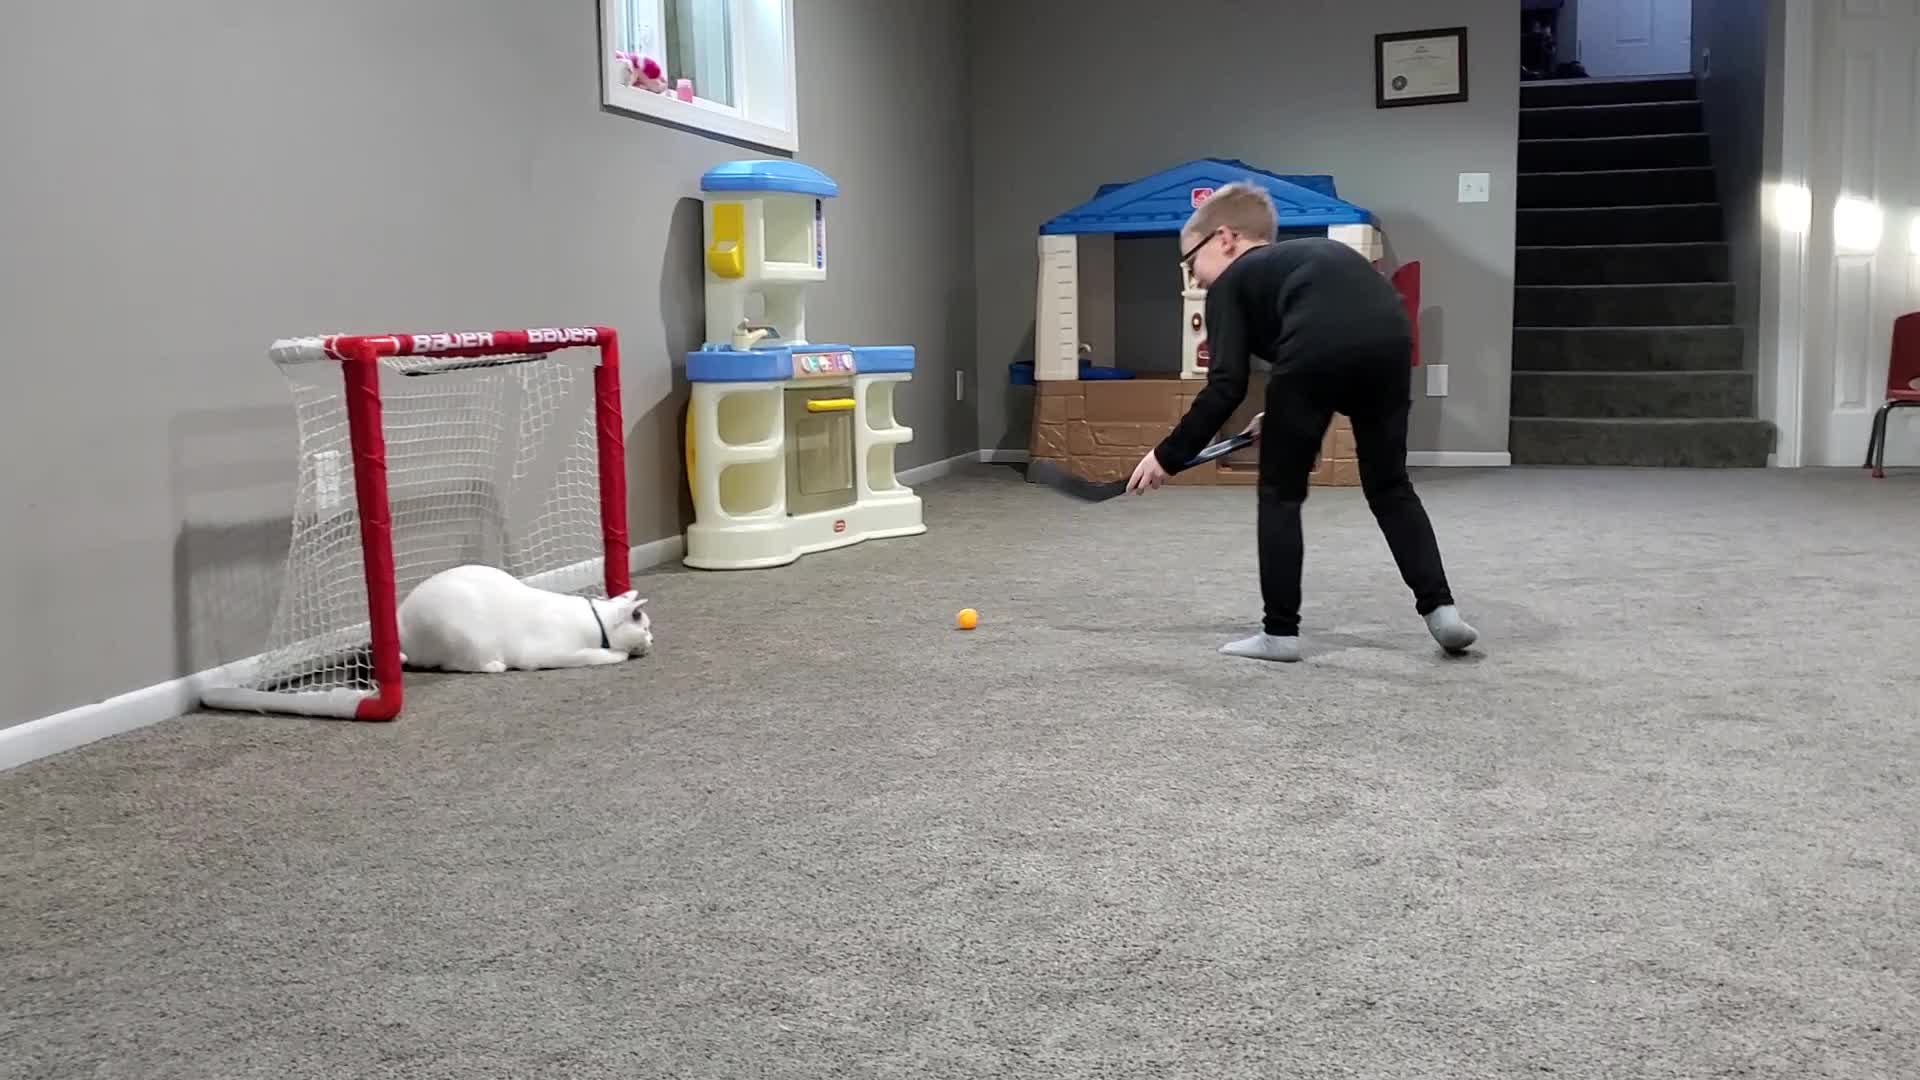 Goalie Cat Restricts Kid From Making Goal